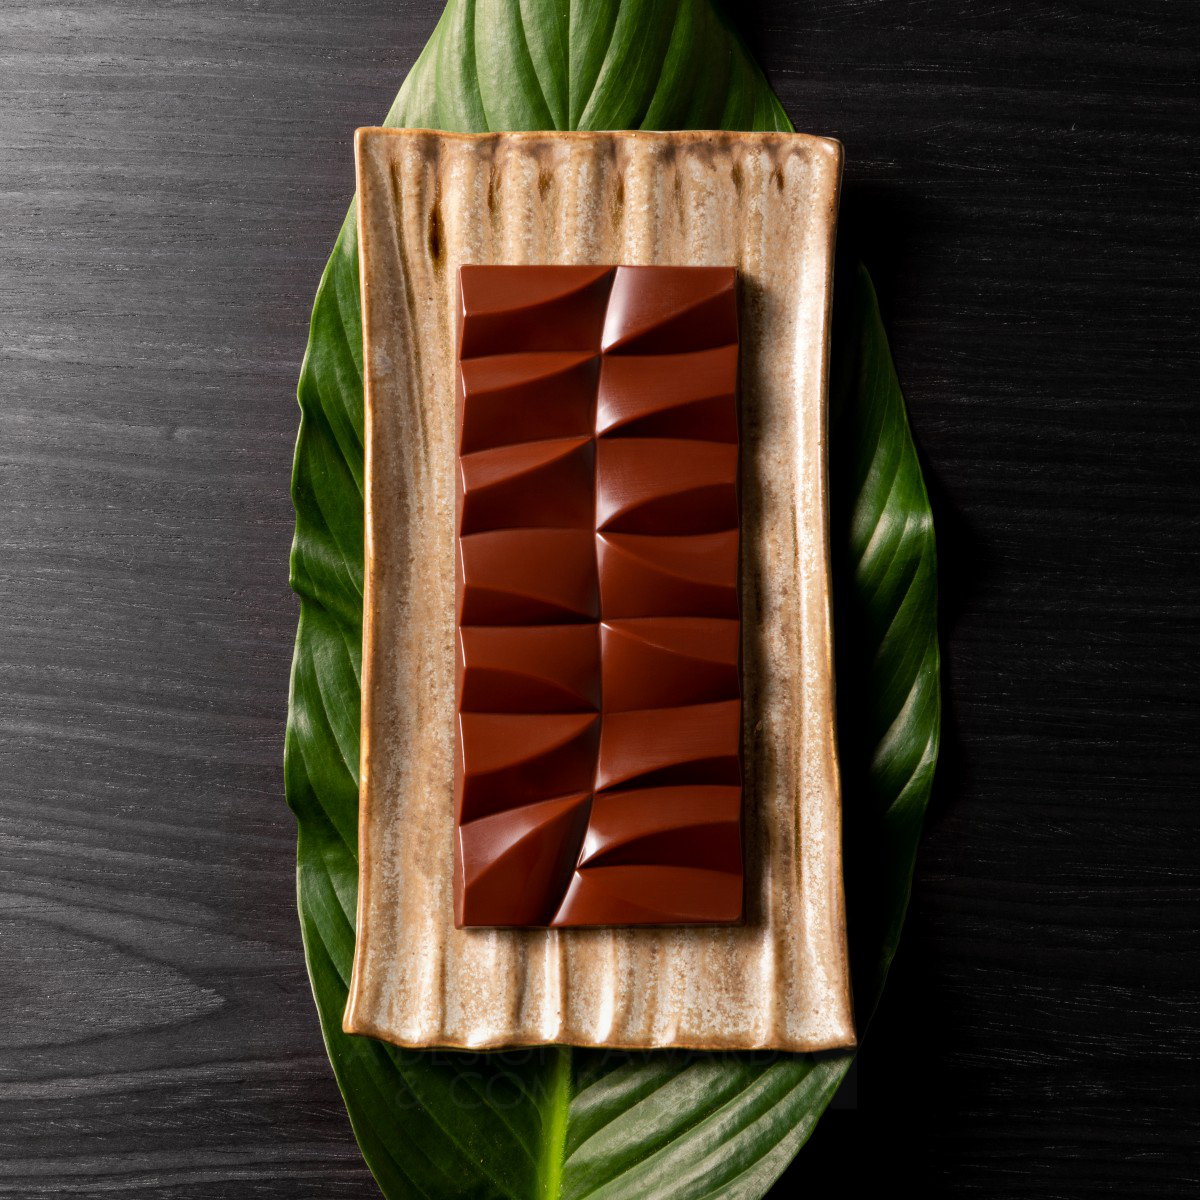 Brazil & Murgel wins Golden at the prestigious A' Food, Beverage and Culinary Arts Design Award with Dengo 80g Chocolate Bar.